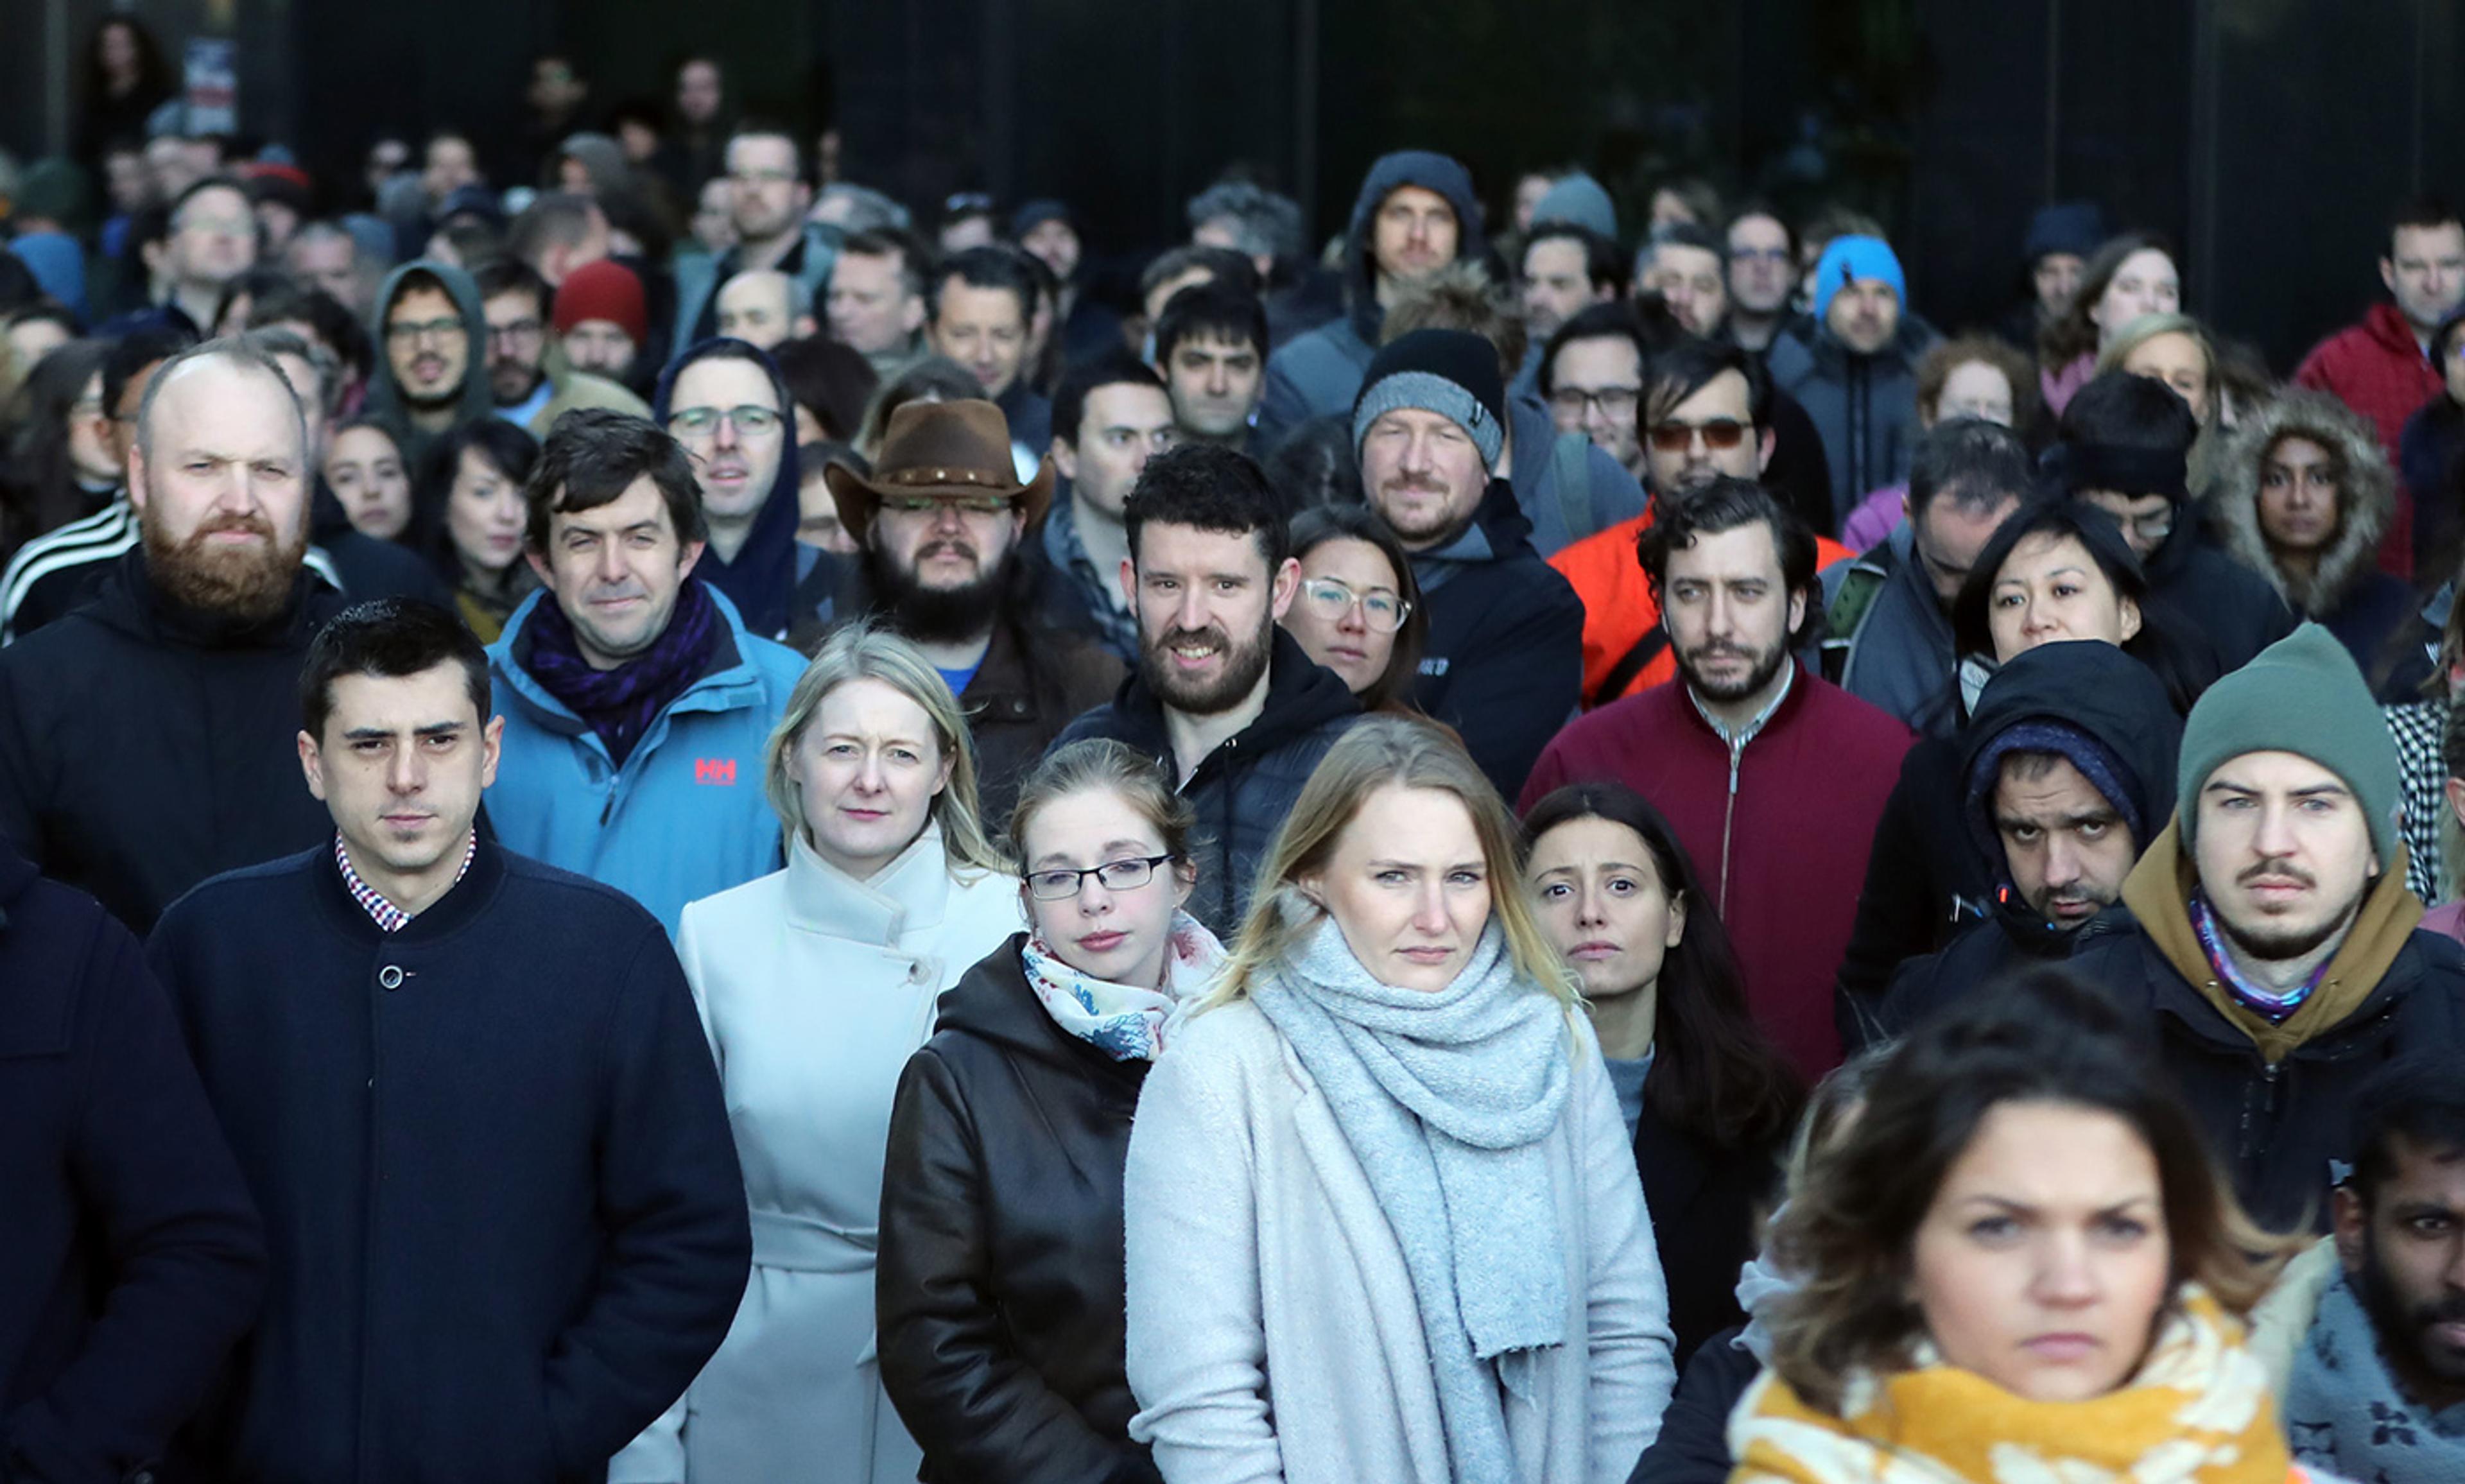 <p>Google employees in Dublin, Ireland, join others from around the world in protest over claims of sexual harassment, gender inequality and systemic racism at the tech giant. <em>Photo by Niall Carson/PA Images via Getty</em></p>